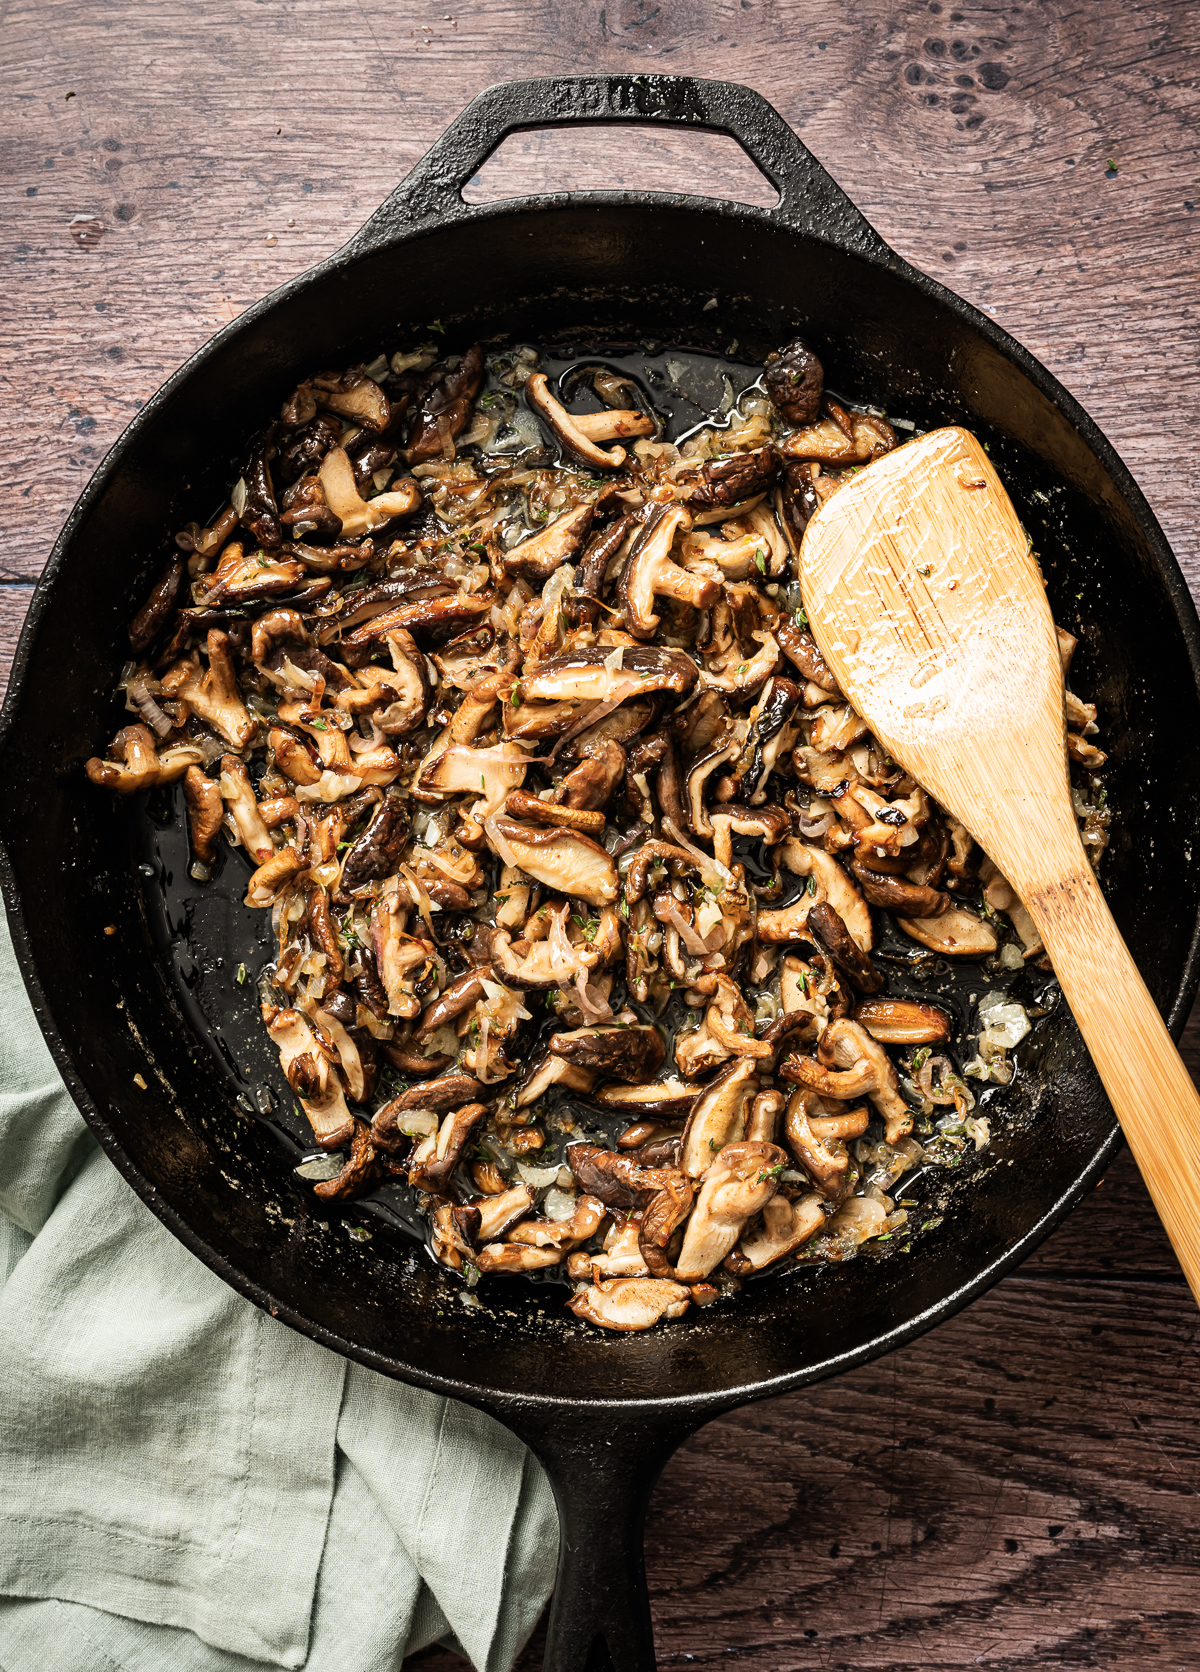 satueed shiitake mushrooms caramelized shallots chopped fresh thyme with sliced garlic and melted butter in cast iron pan bamboo spatula